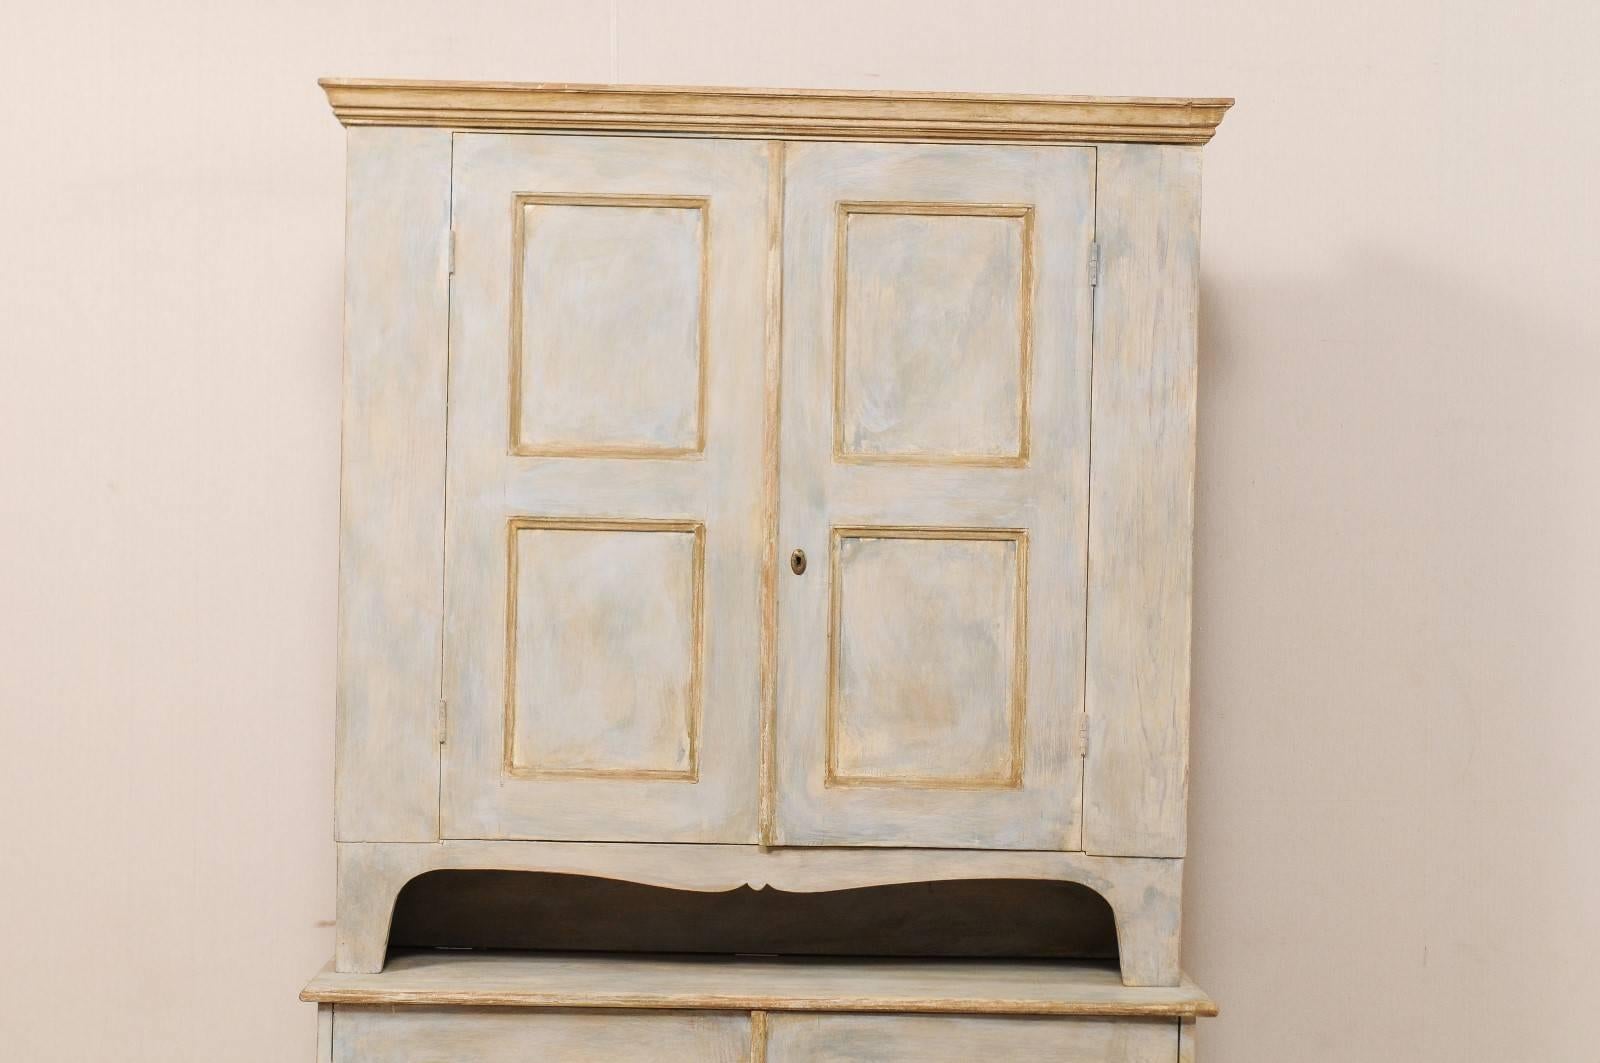 Carved Swedish Mid-19th Century Painted Wood Cabinet with Ample Shelves and Storage For Sale